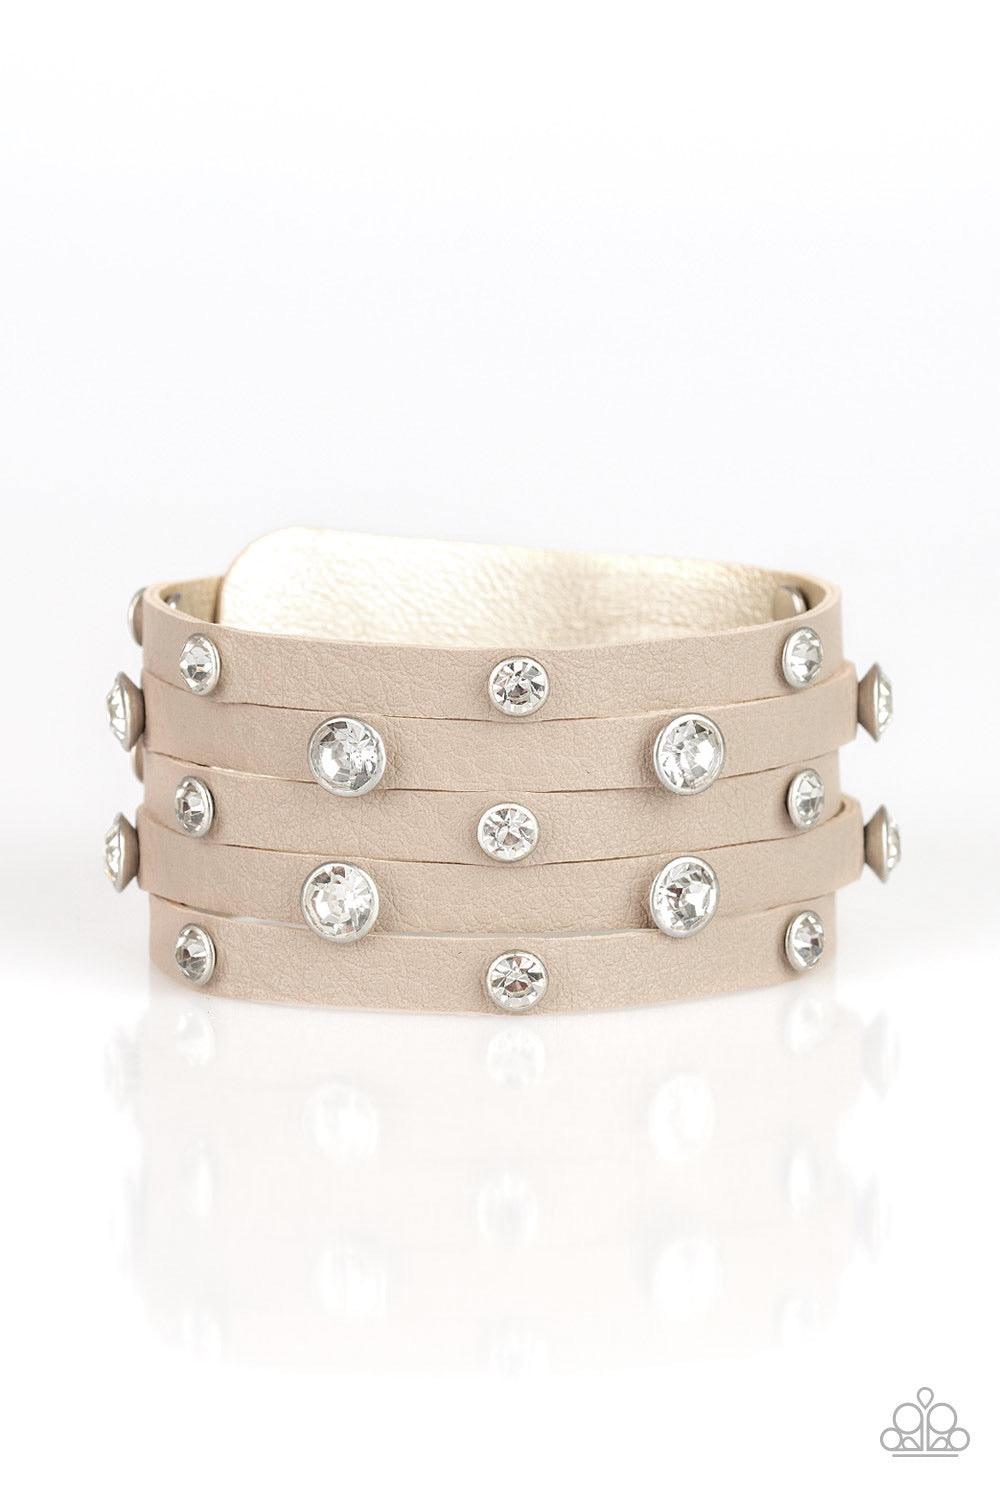 Paparazzi Accessories Rhinestone Reputation - Brown Dotted with glassy white rhinestones, a thick brown leather band has been spliced into five glittery strands around the wrist for a sassy look. Features an adjustable snap closure. Sold as one individual